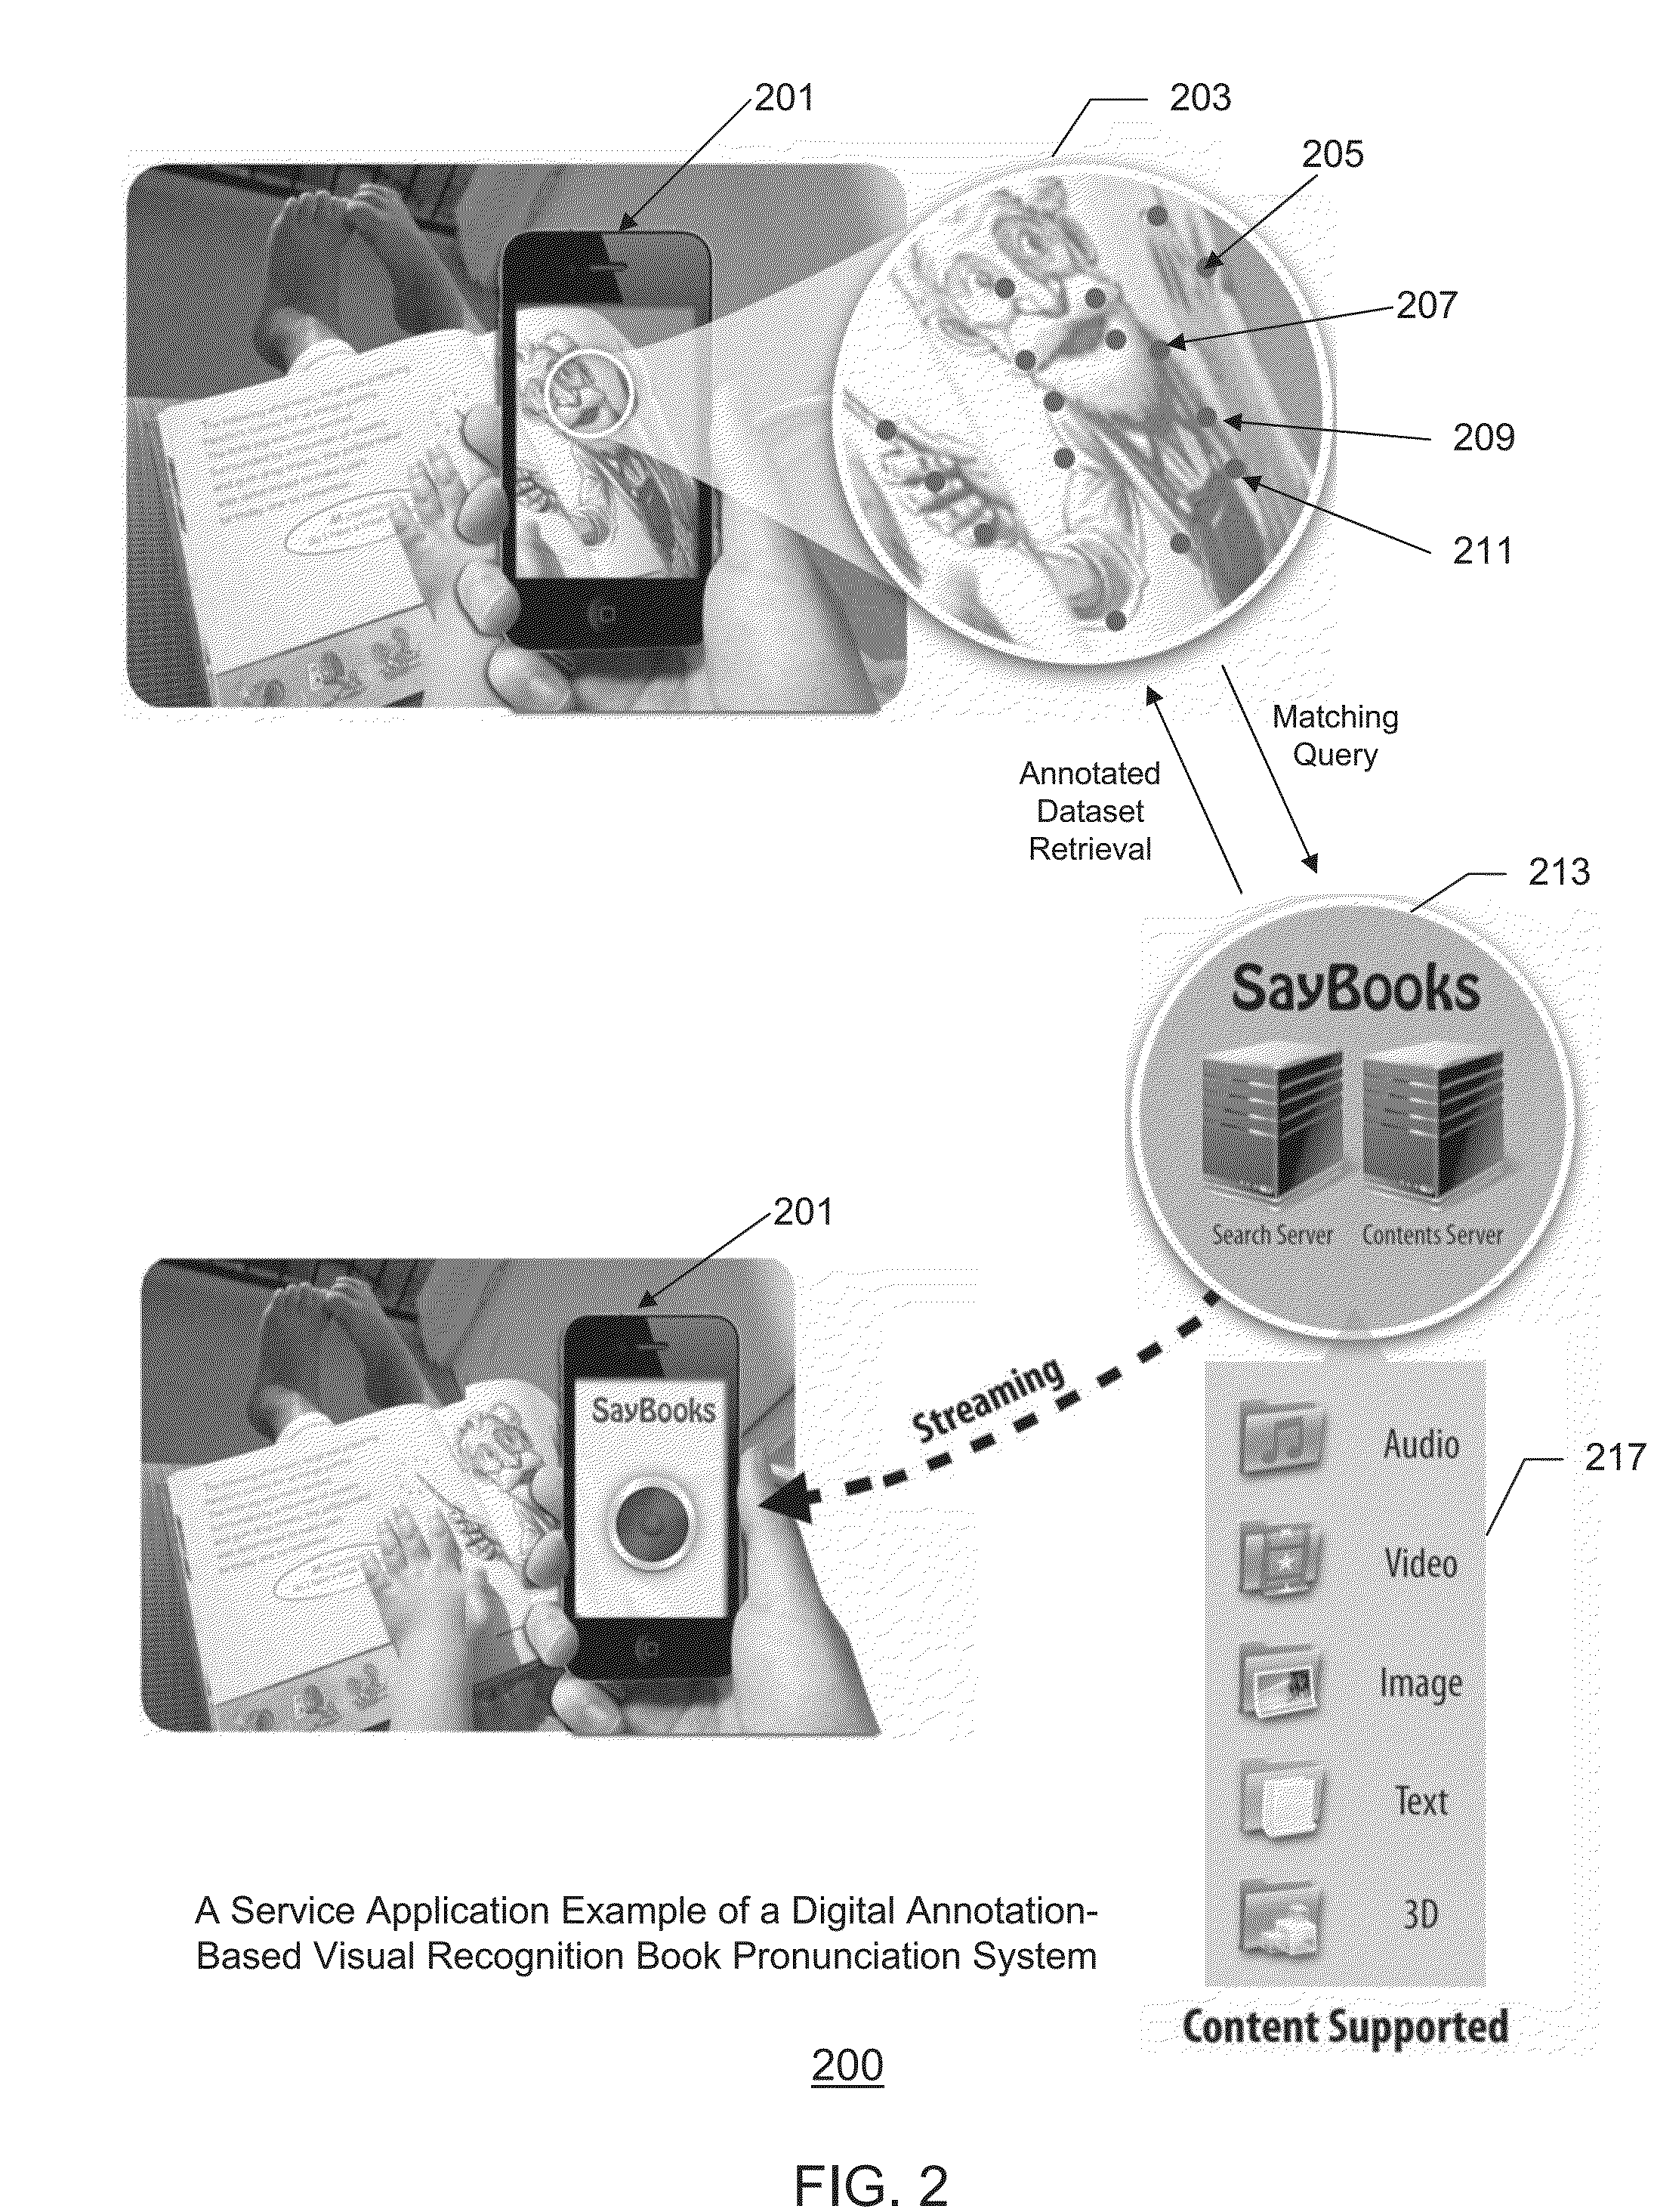 Digital annotation-based visual recognition book pronunciation system and related method of operation